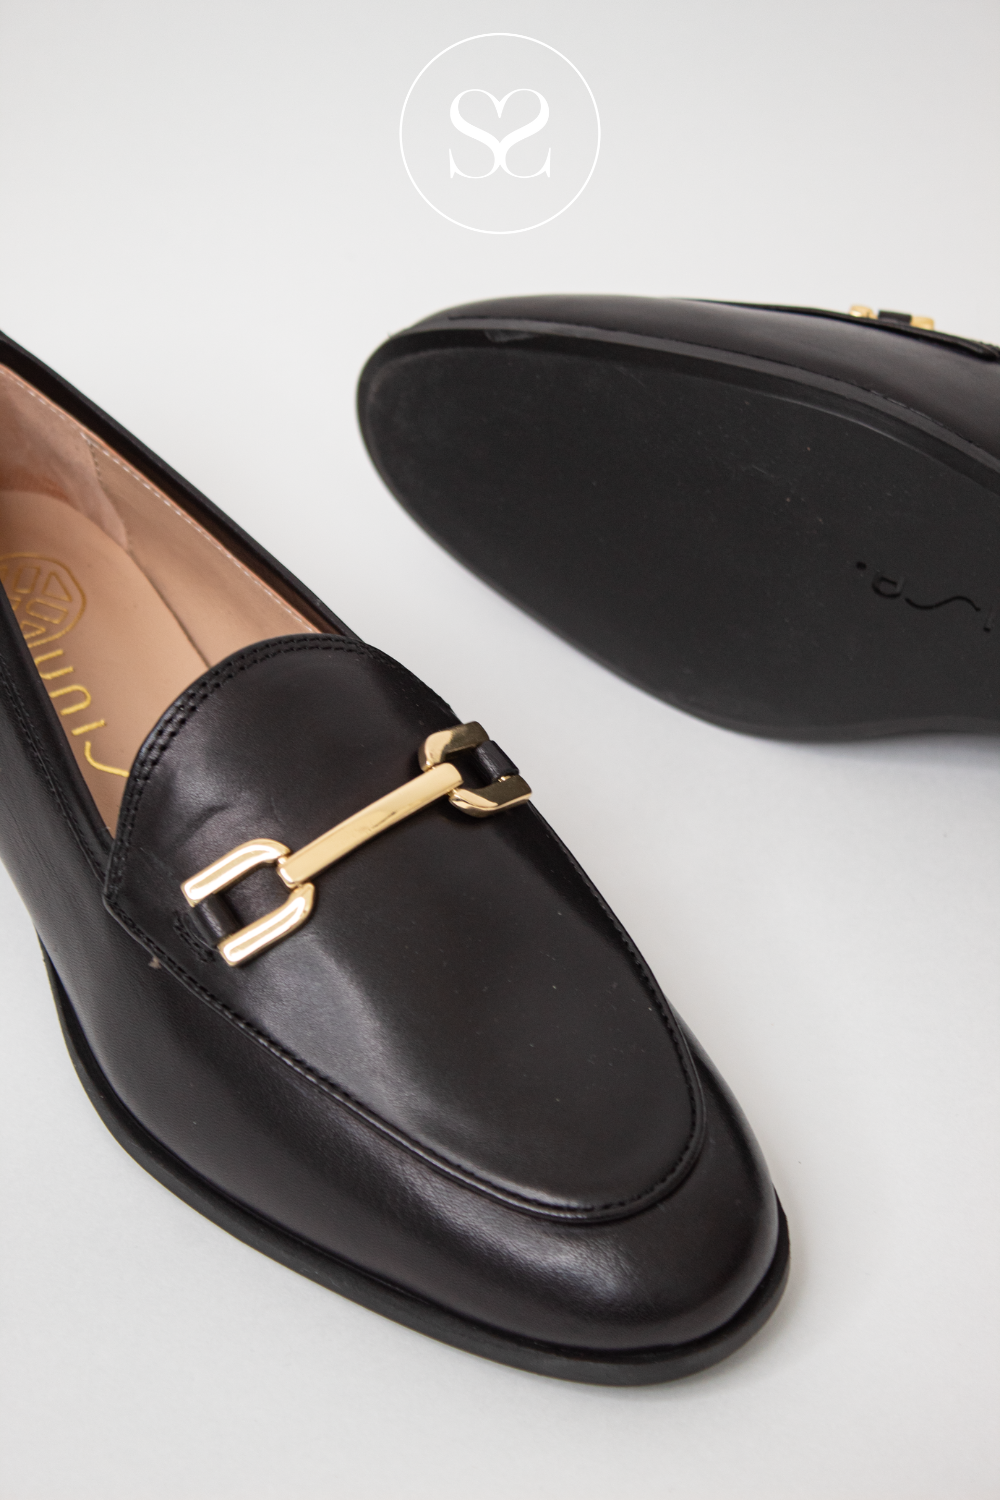 UNISA DAIMIEL BLACK FLAT LOAFER WITH GOLD CHAIN DETAIL